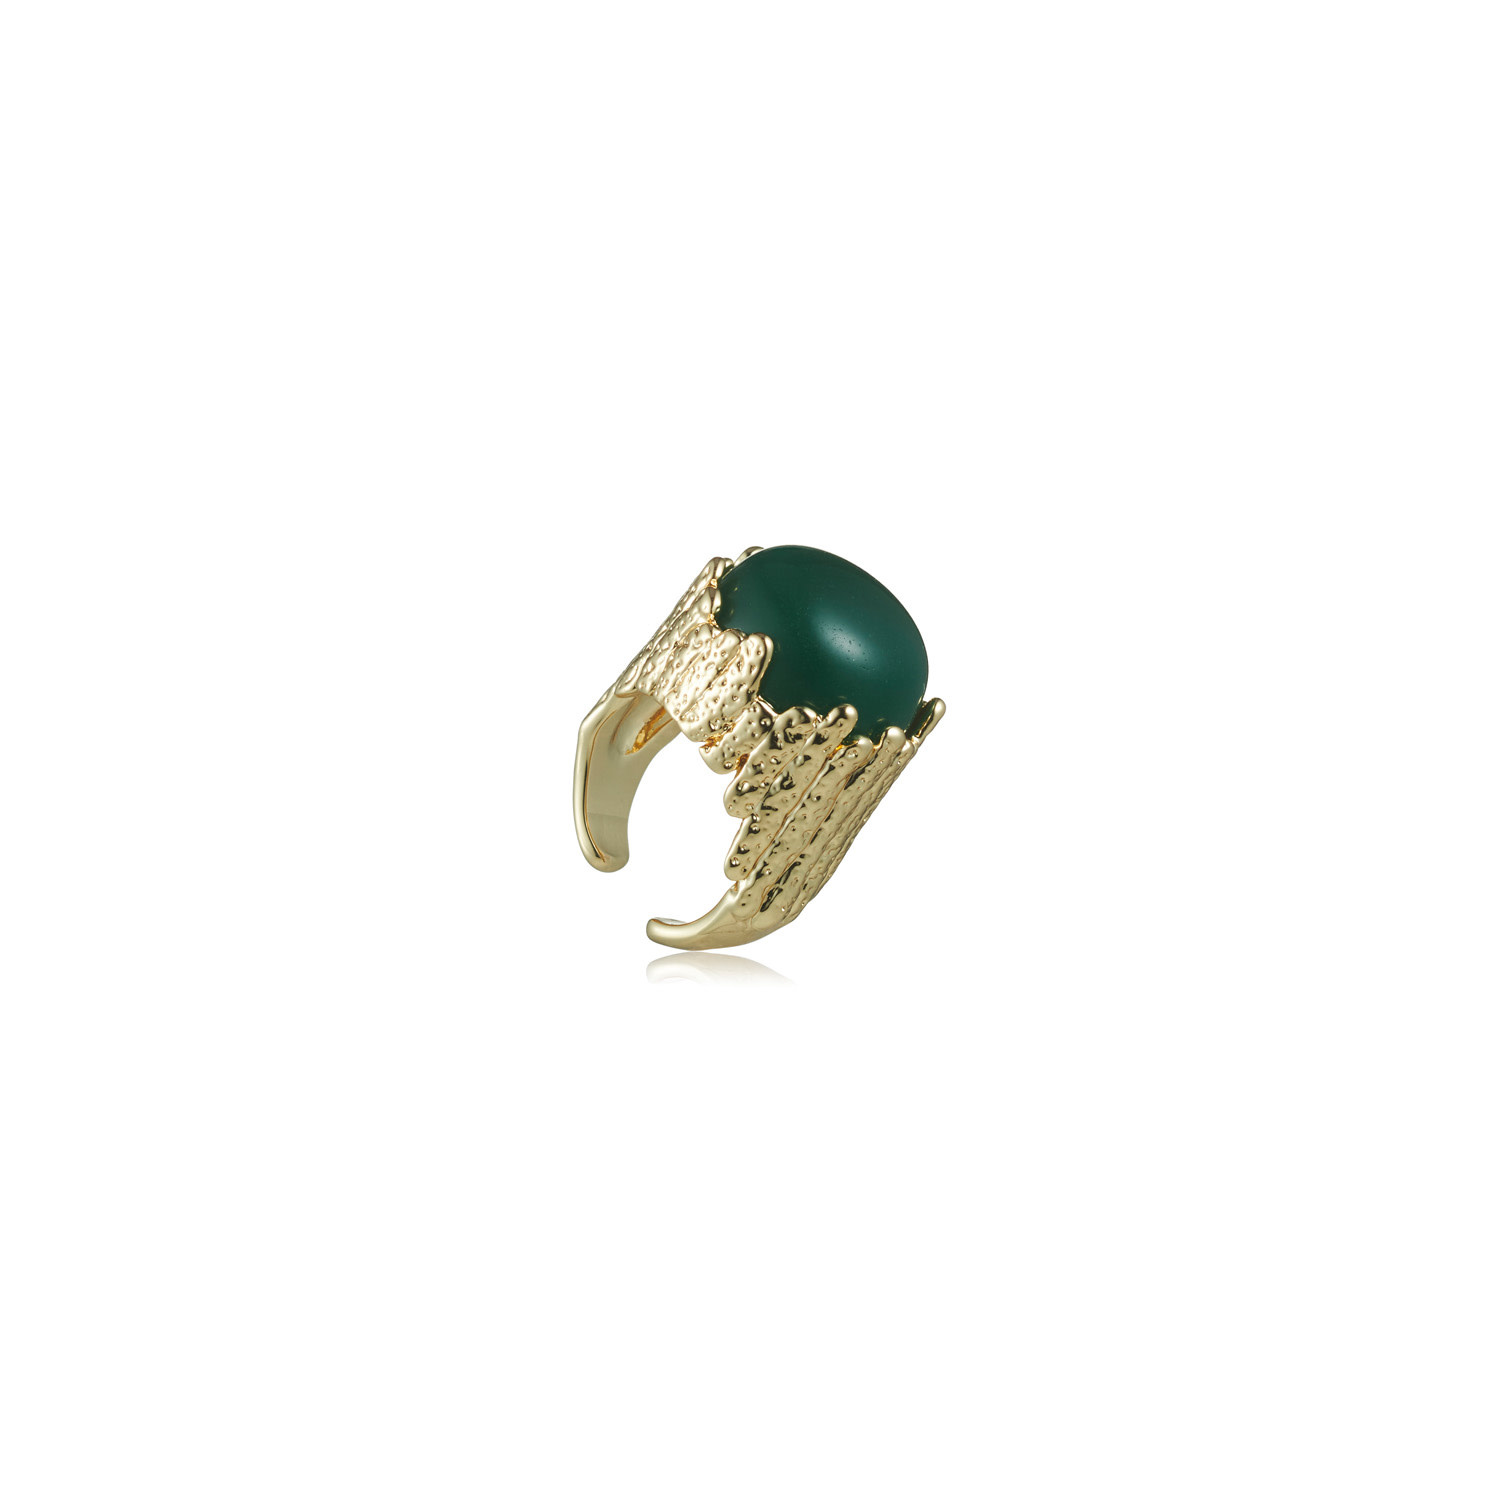 Jupiter Ring - Brut Baum Collection - 14ct Gold Plated Ring with Cabochon Green Agate  - Sarina Suriano for BECKER MINTY-2